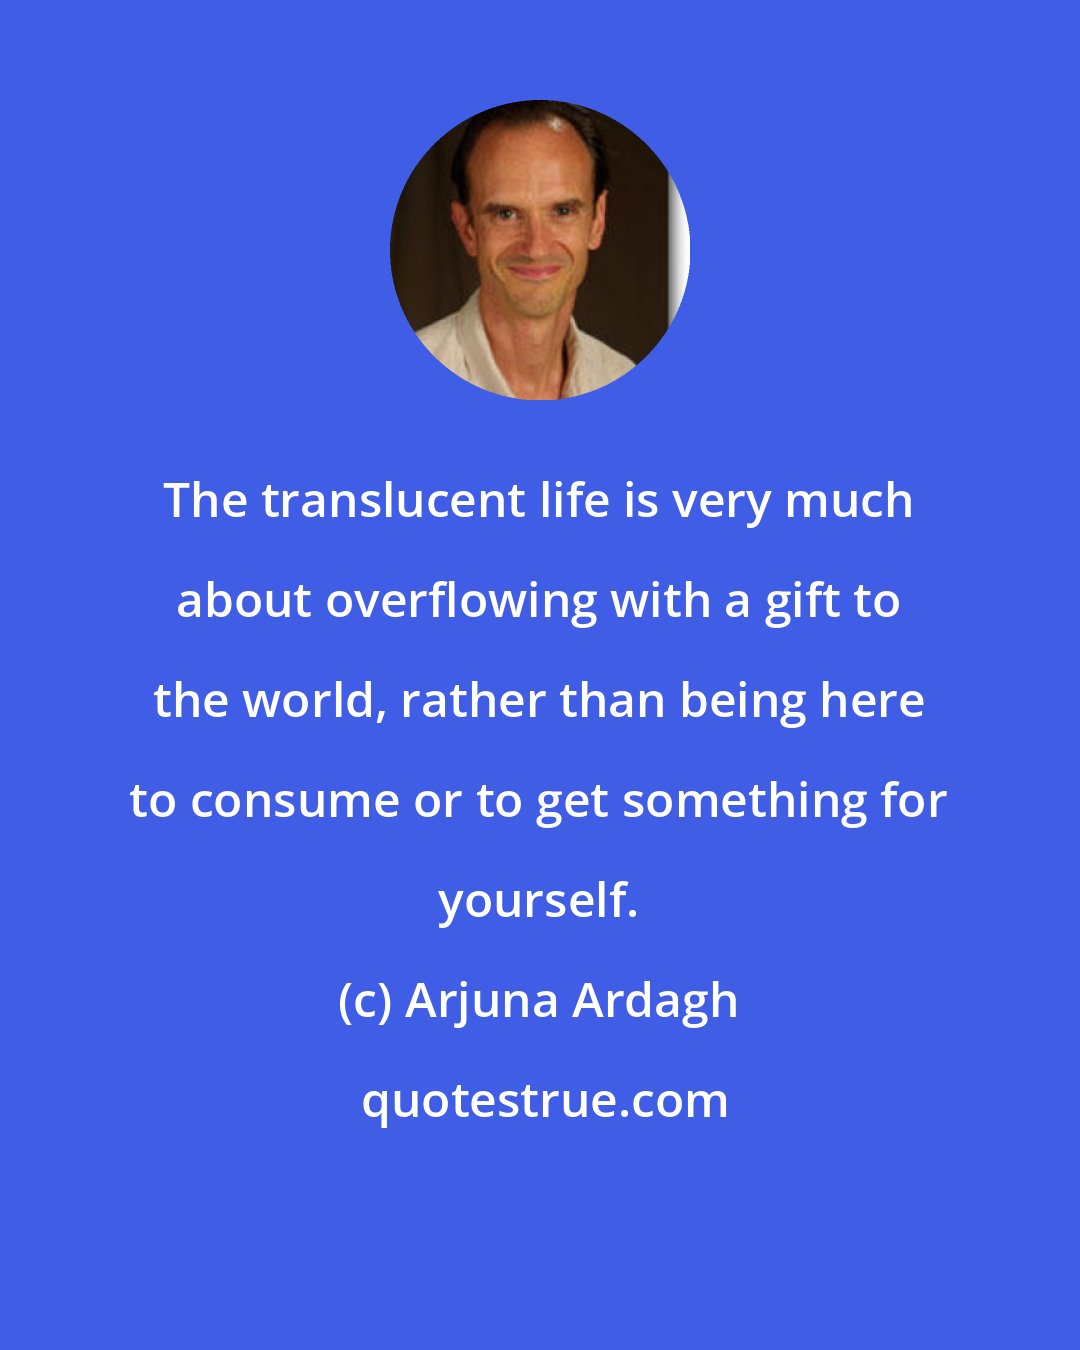 Arjuna Ardagh: The translucent life is very much about overflowing with a gift to the world, rather than being here to consume or to get something for yourself.